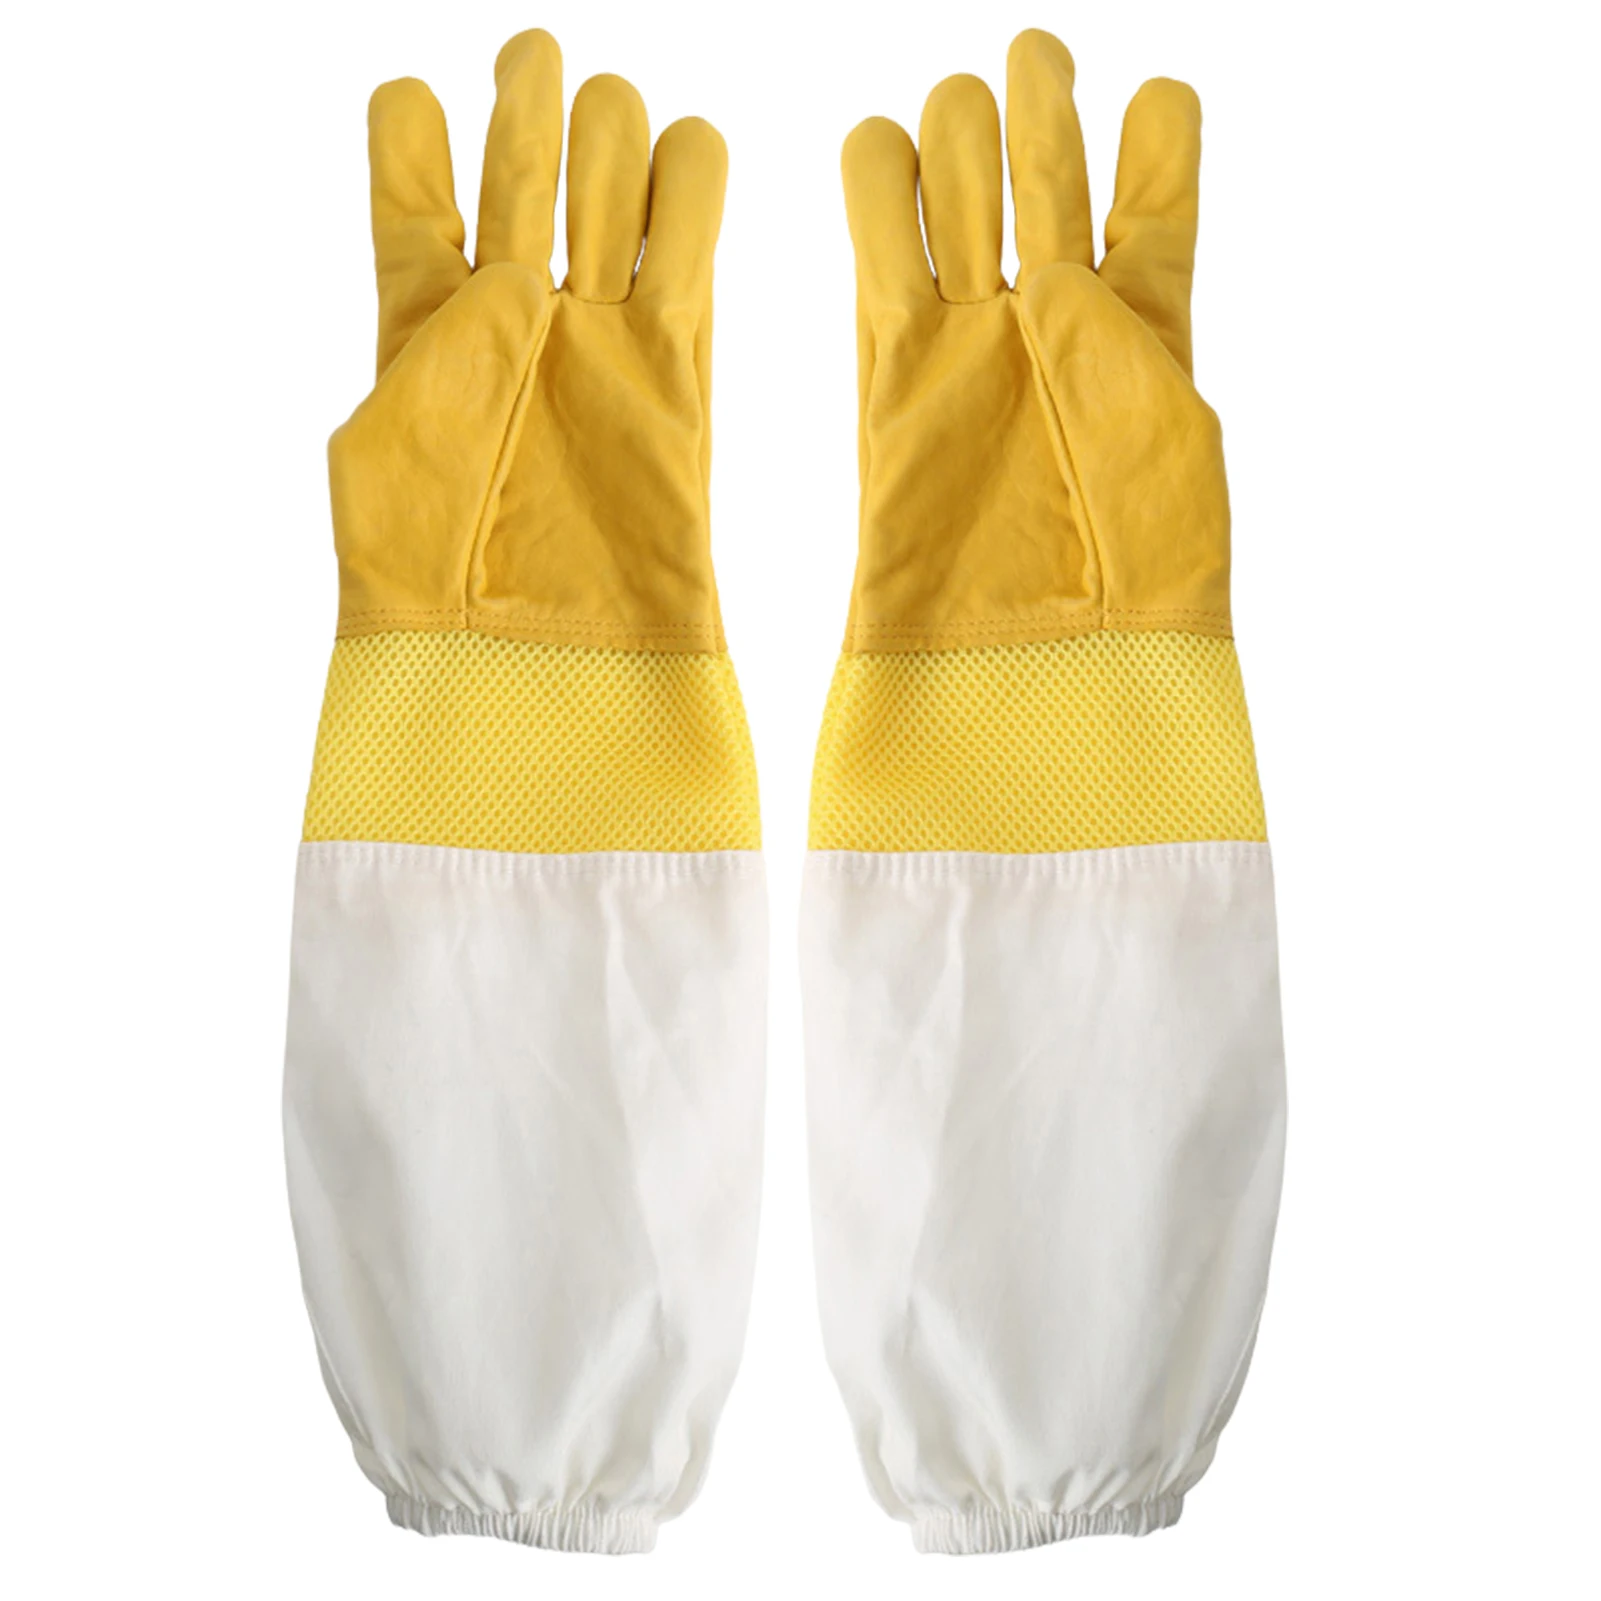 

1 Pair Beekeeping Gloves Breathable Mesh Beekeeper Gloves Safety Protection Breathable Mesh Material Practical Apiculture